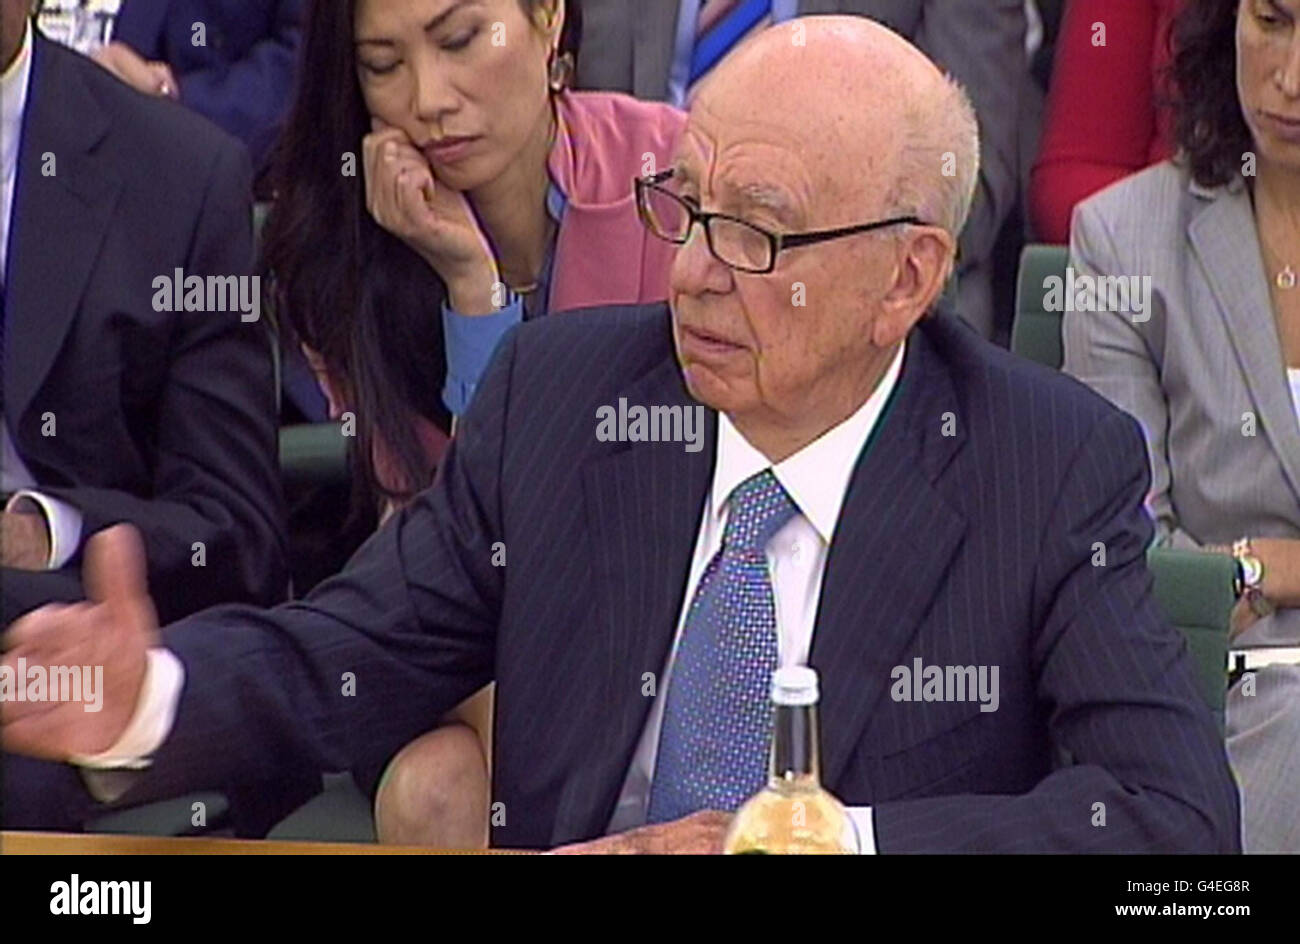 Rupert Murdoch, Chairman and Chief Executive Officer, News Corporation giving evidence to the Culture, Media and Sport Select Committee in the House of Commons in central London on the News of the World phone-hacking scandal. Stock Photo